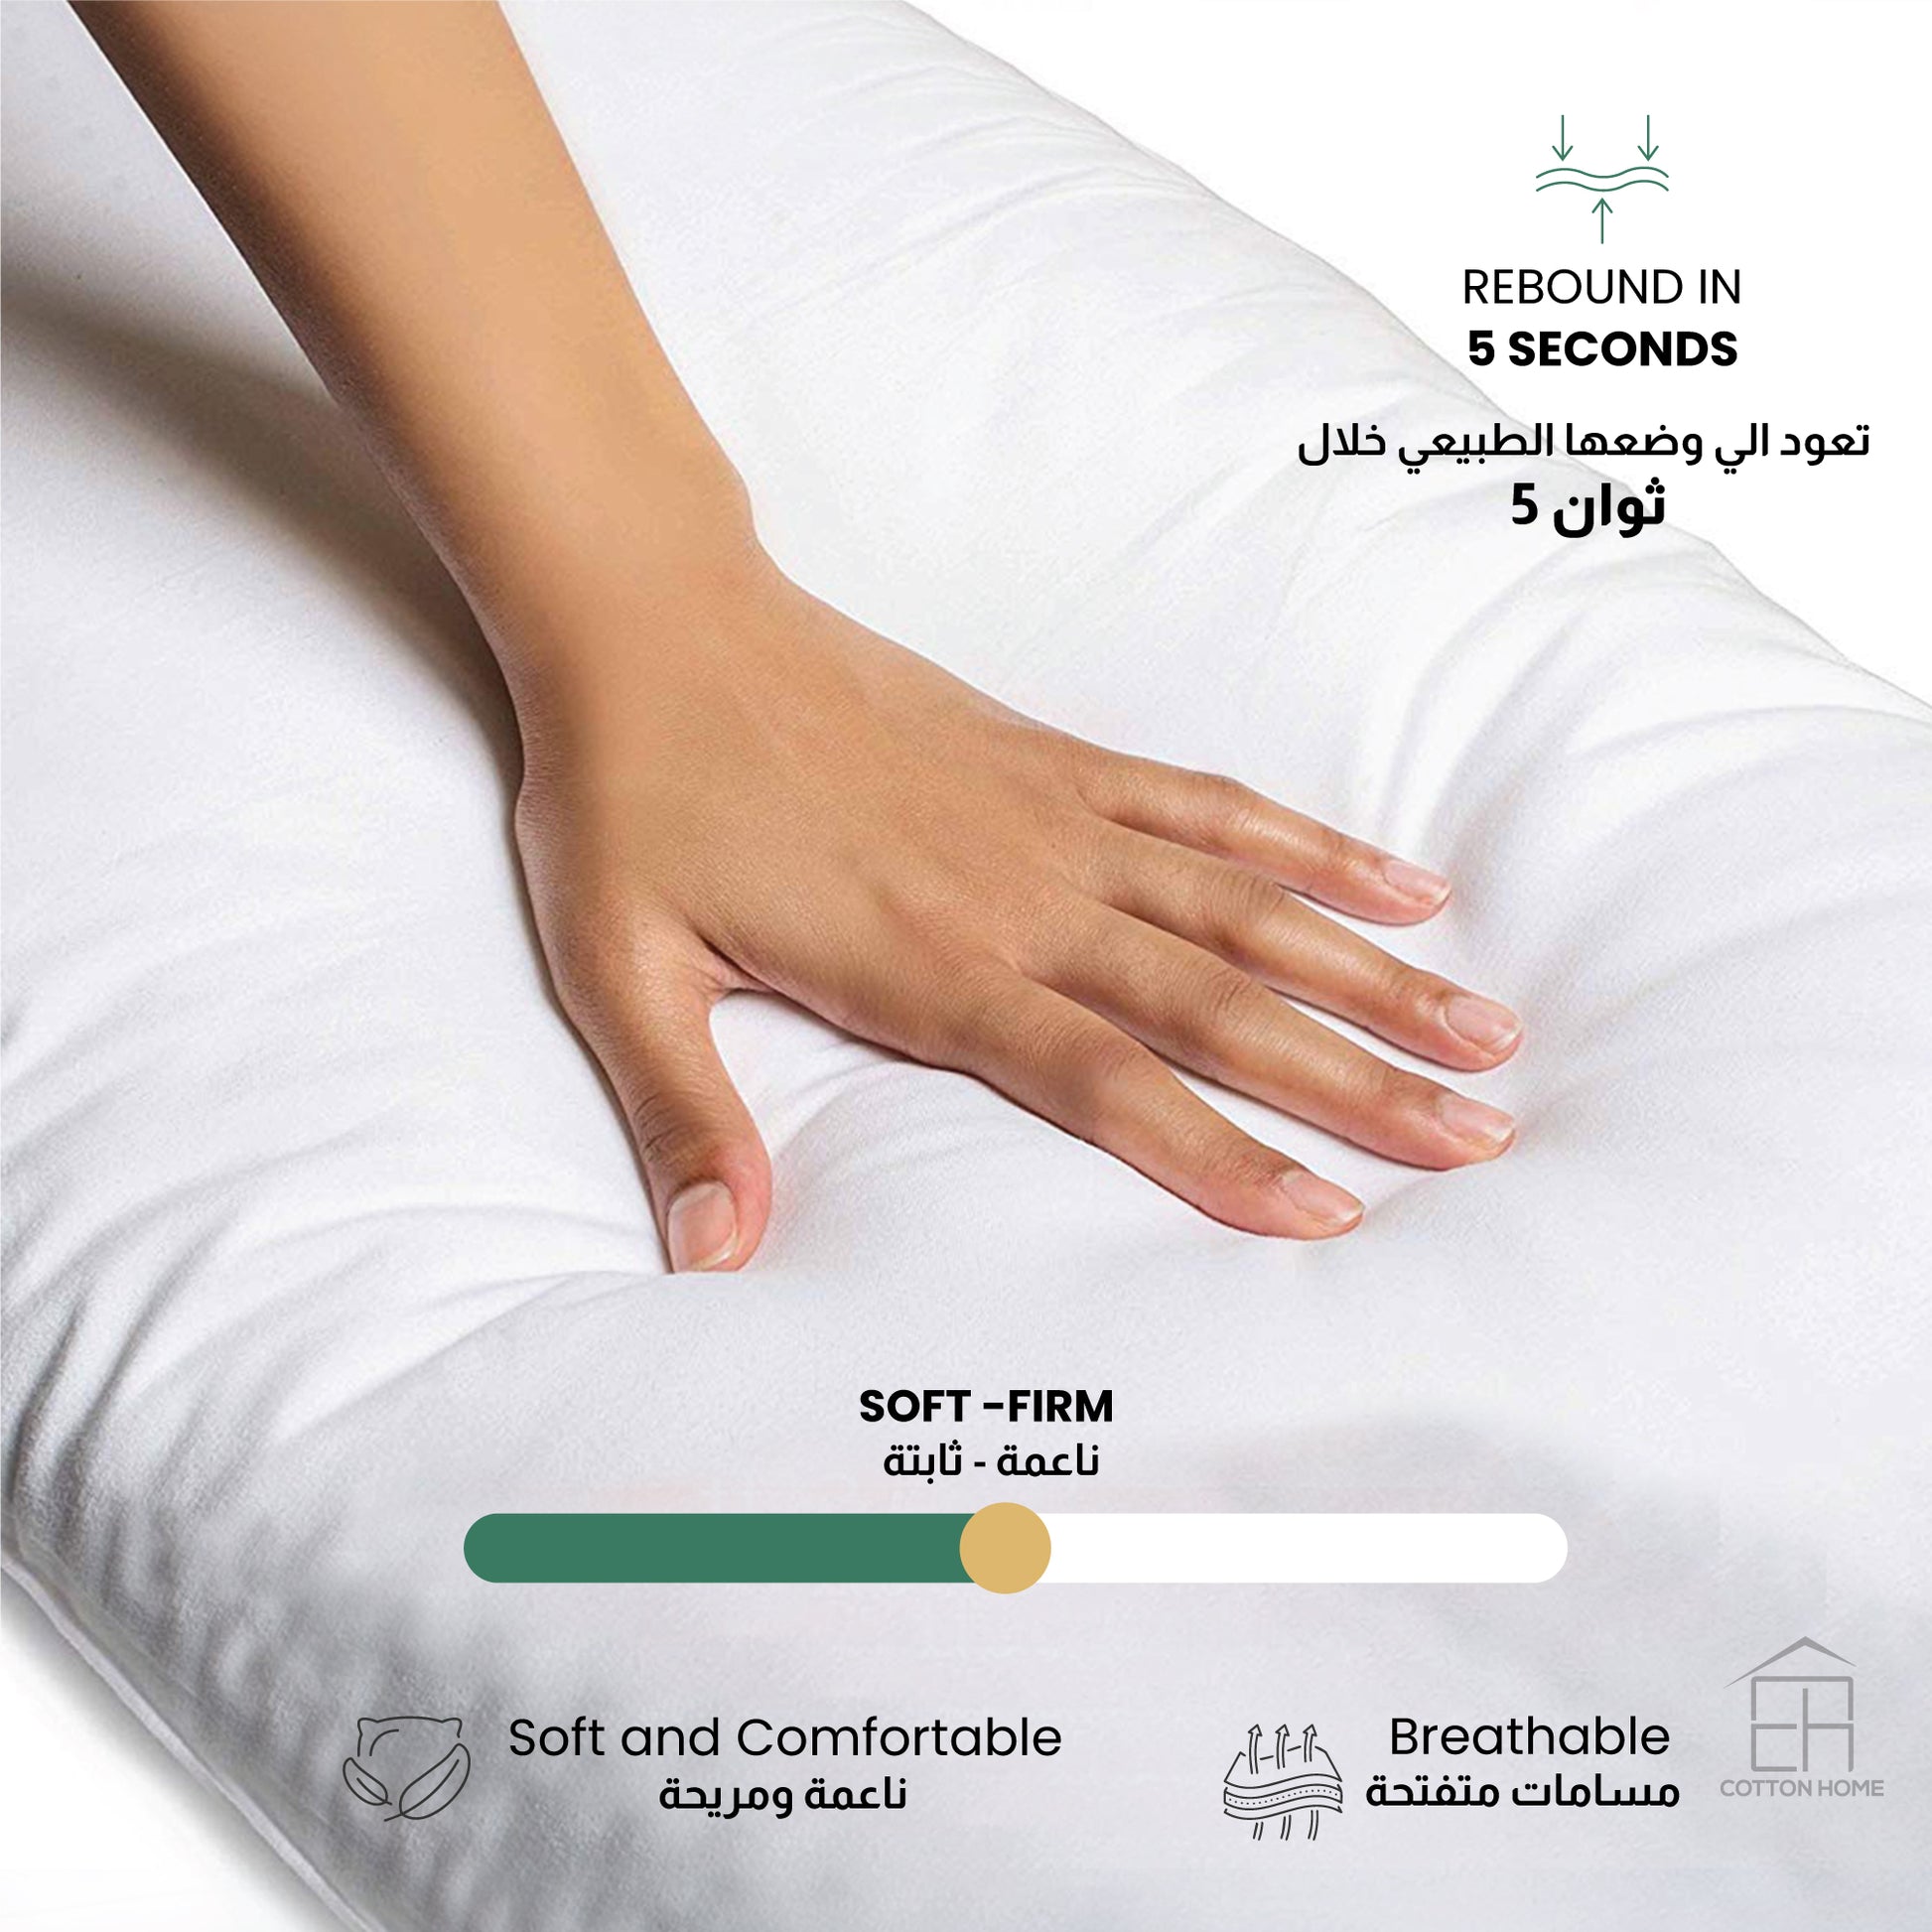 Premium Quality Standard Majestic Pillow Pack of 2 Suitable for Back Sleeper Pillow 50x75 cm